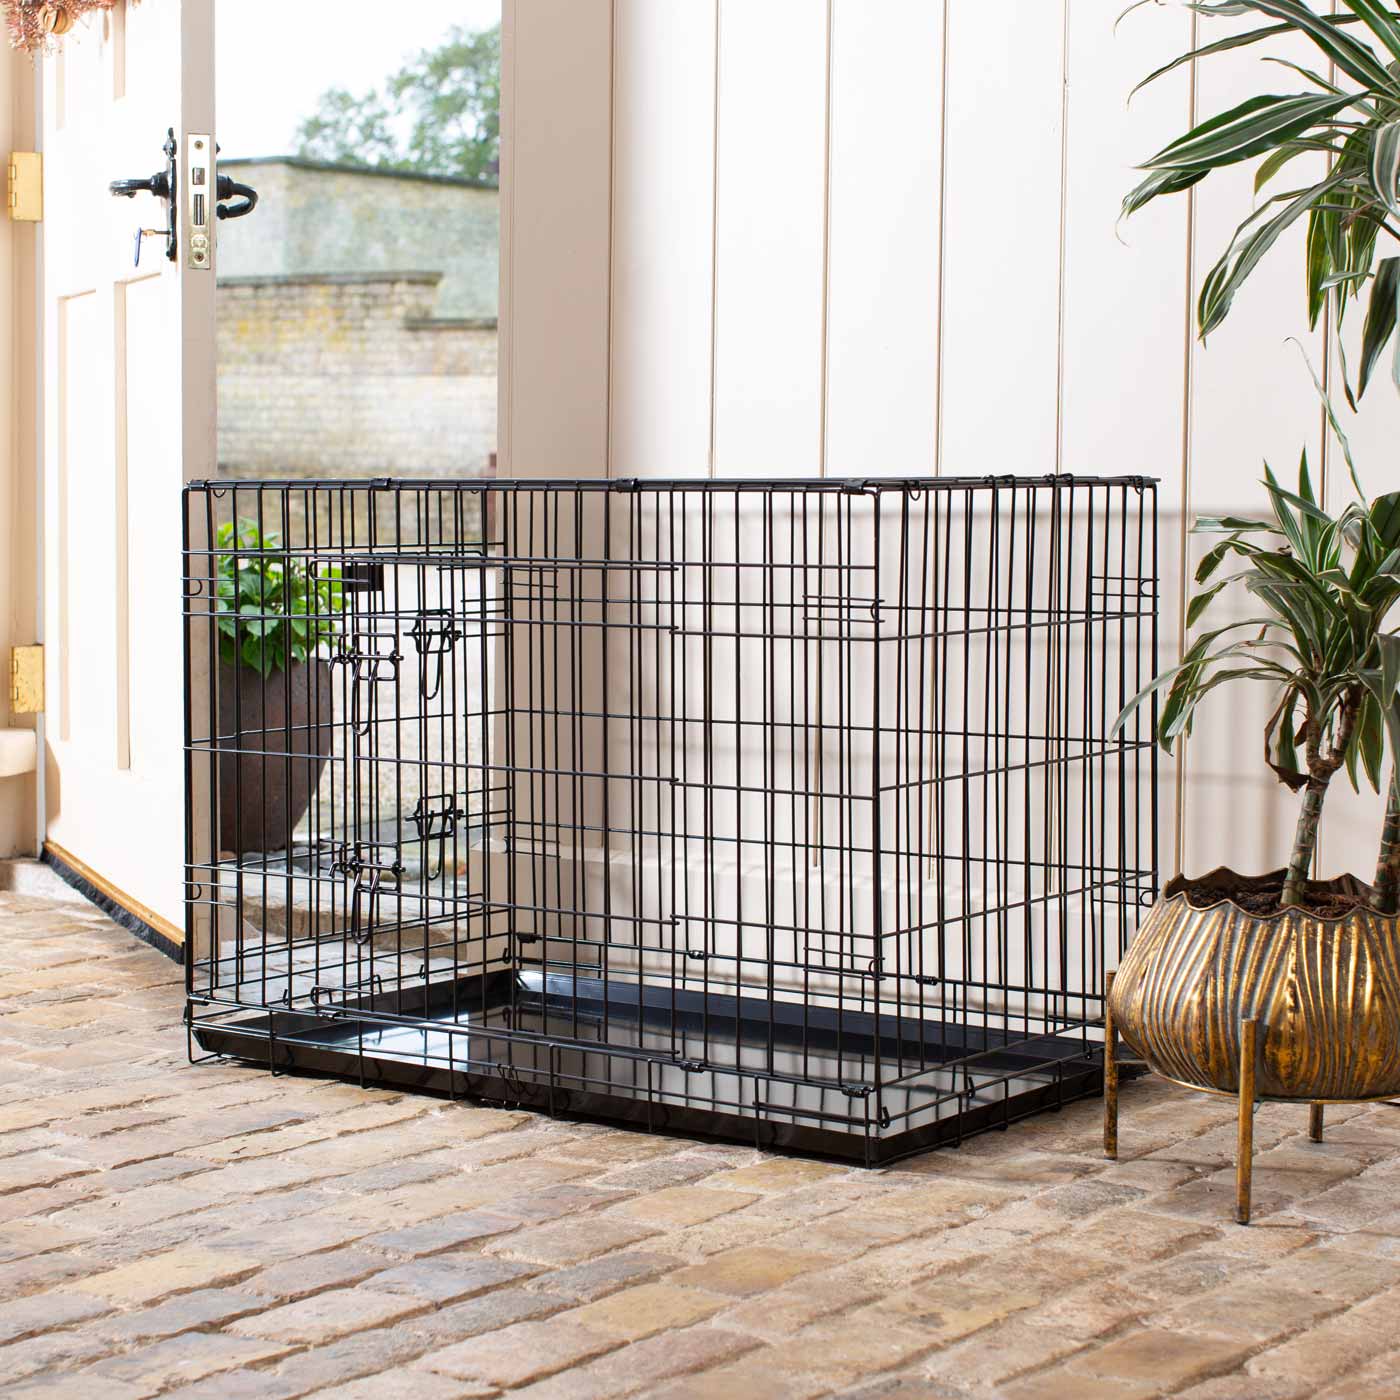 Deluxe Black Dog Cage, Dog Accessories